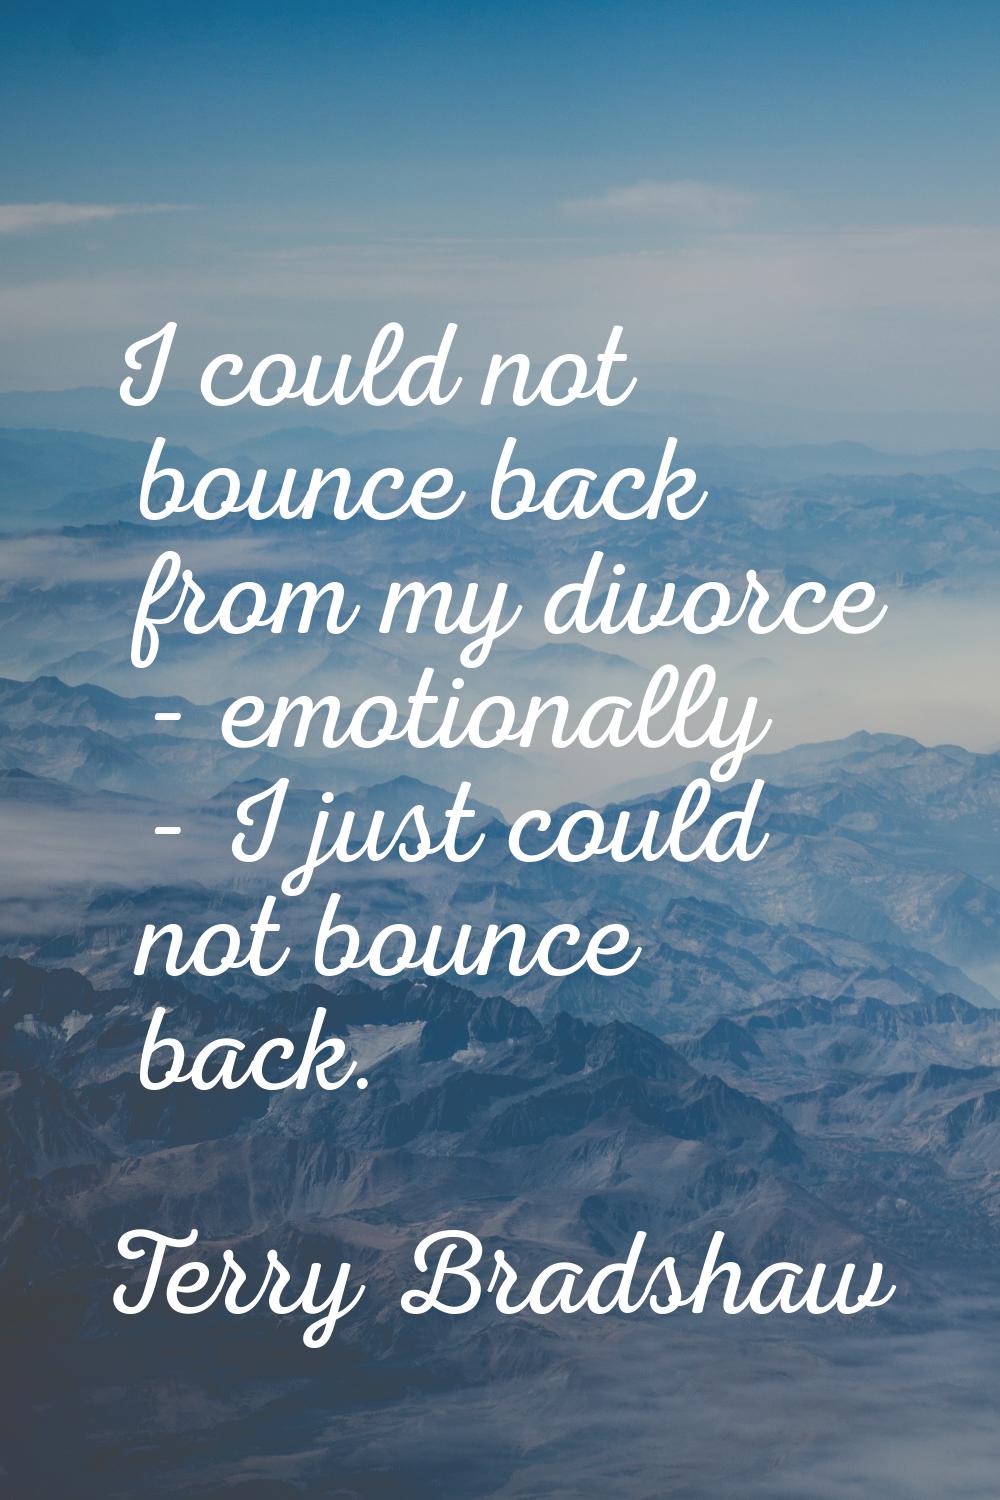 I could not bounce back from my divorce - emotionally - I just could not bounce back.